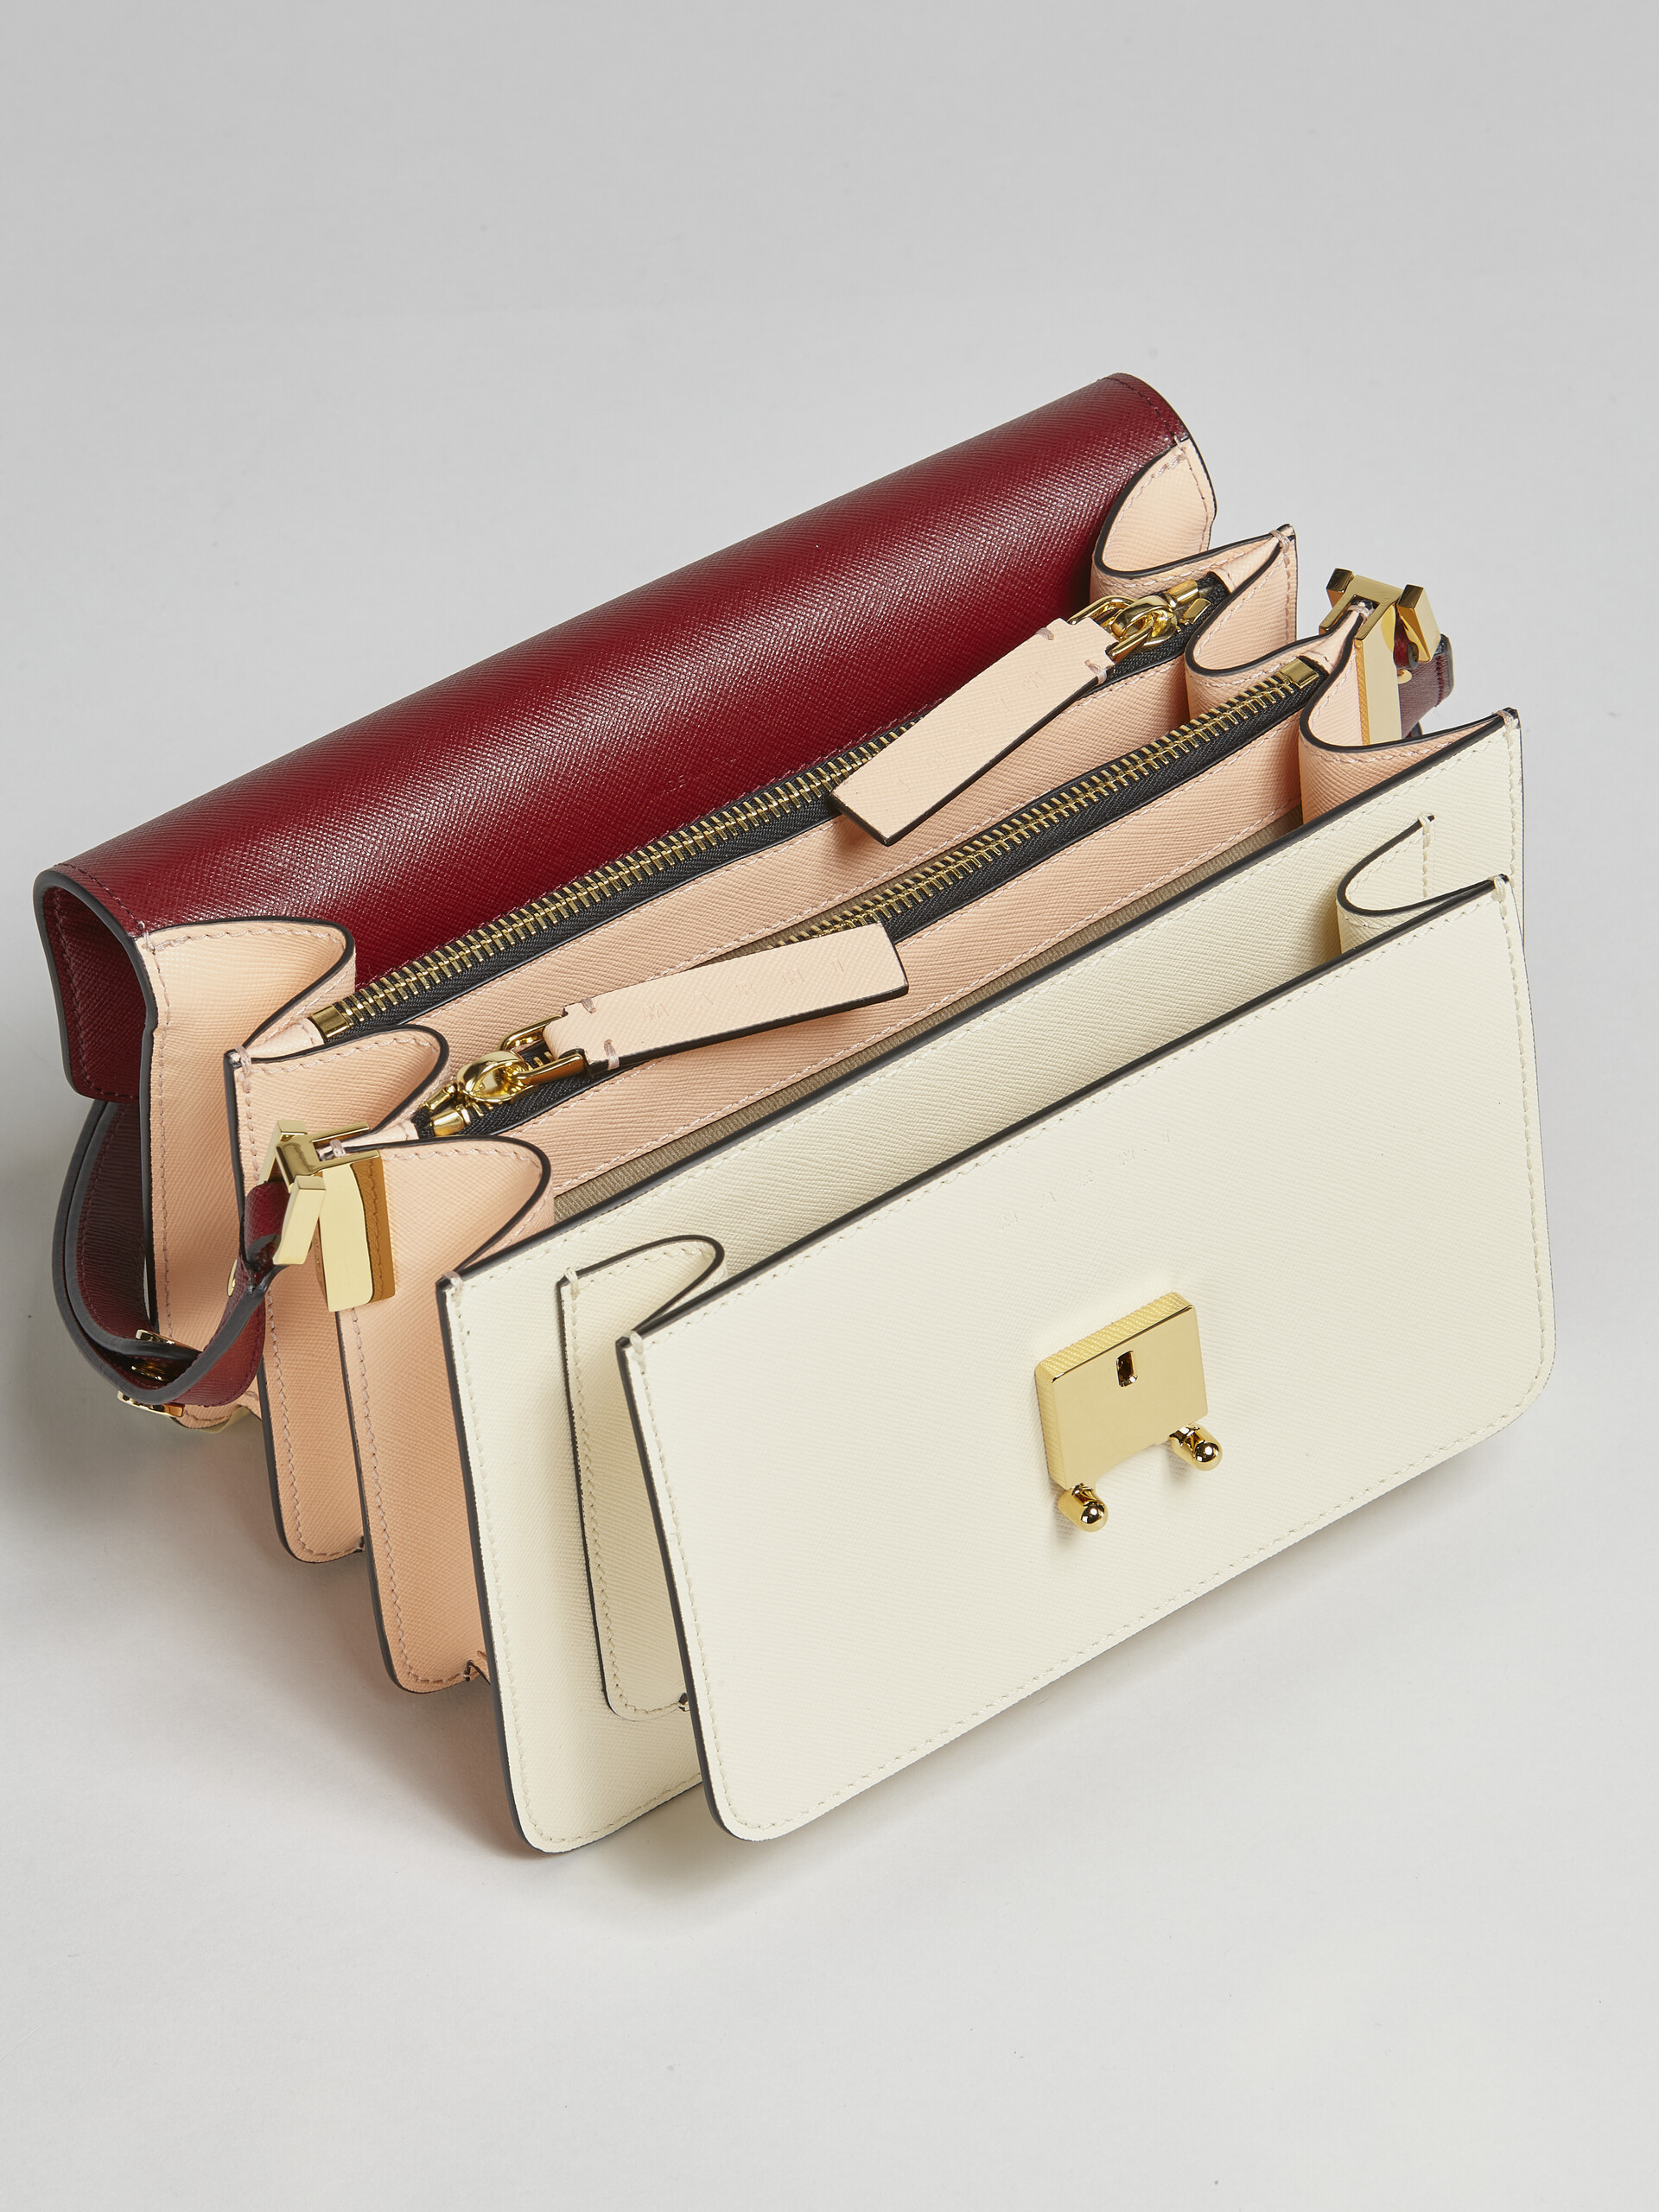 TRUNK medium bag in red white and pink saffiano leather - Shoulder Bags - Image 3